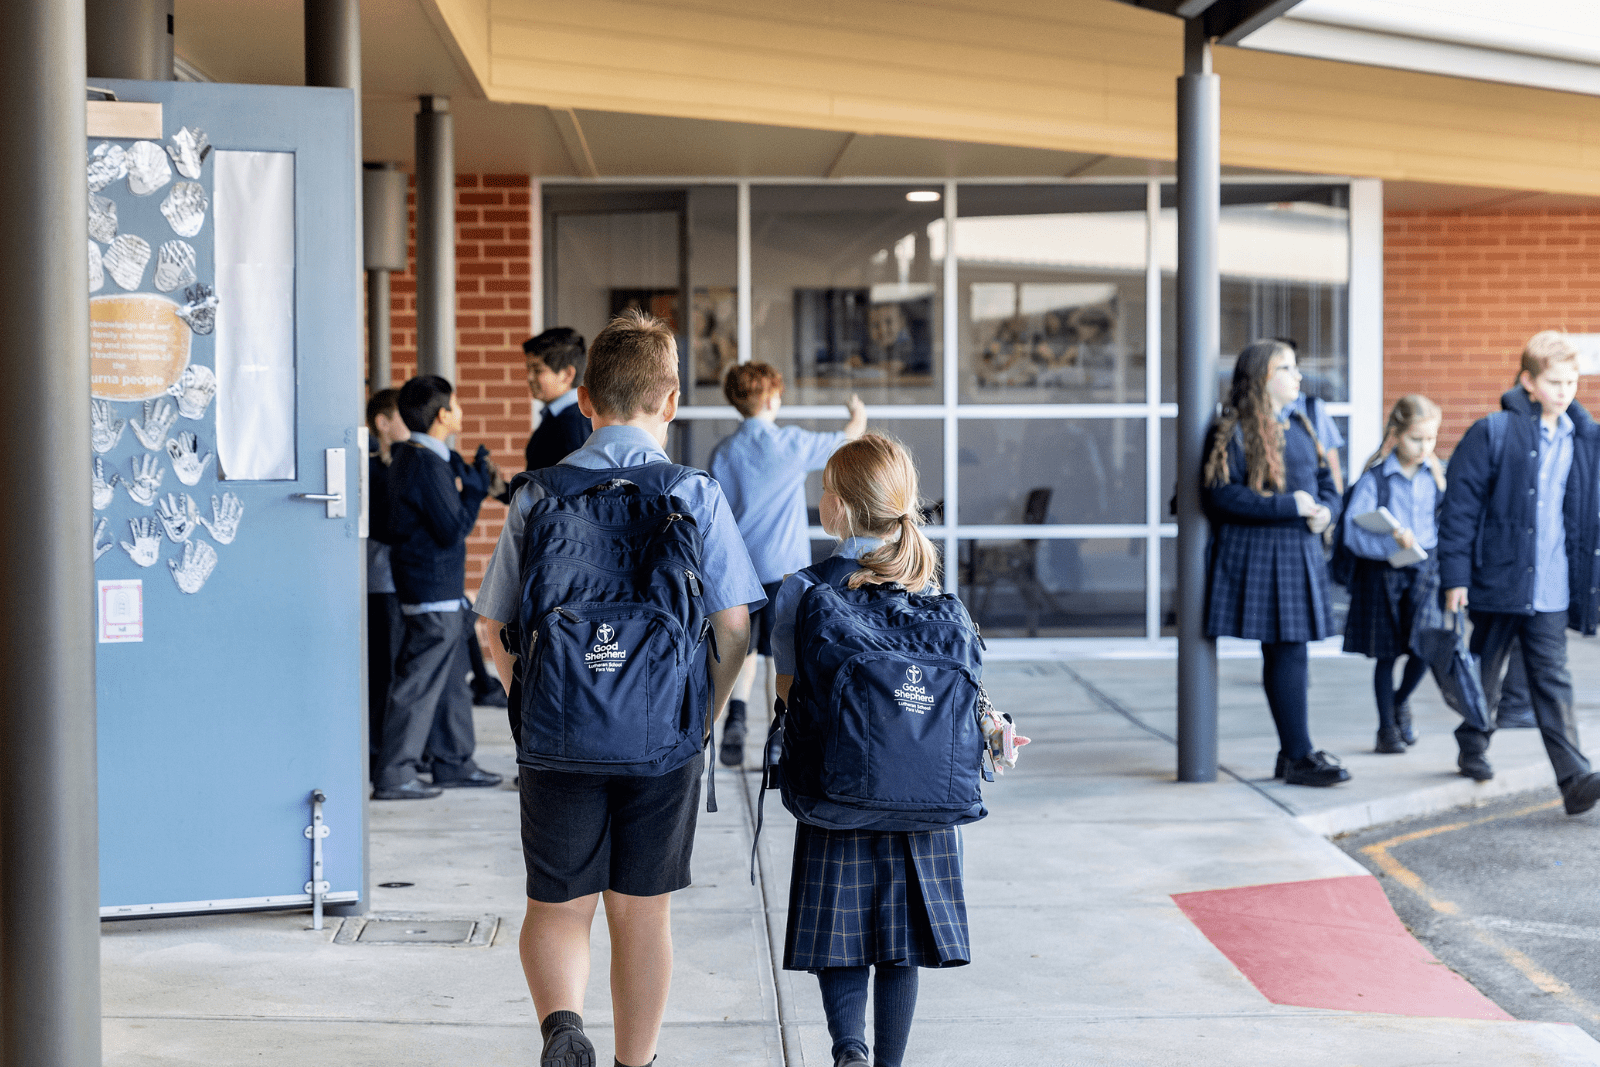 Two students are walking away from the camera. They are wearing school bags. Students are in the background walking to class.